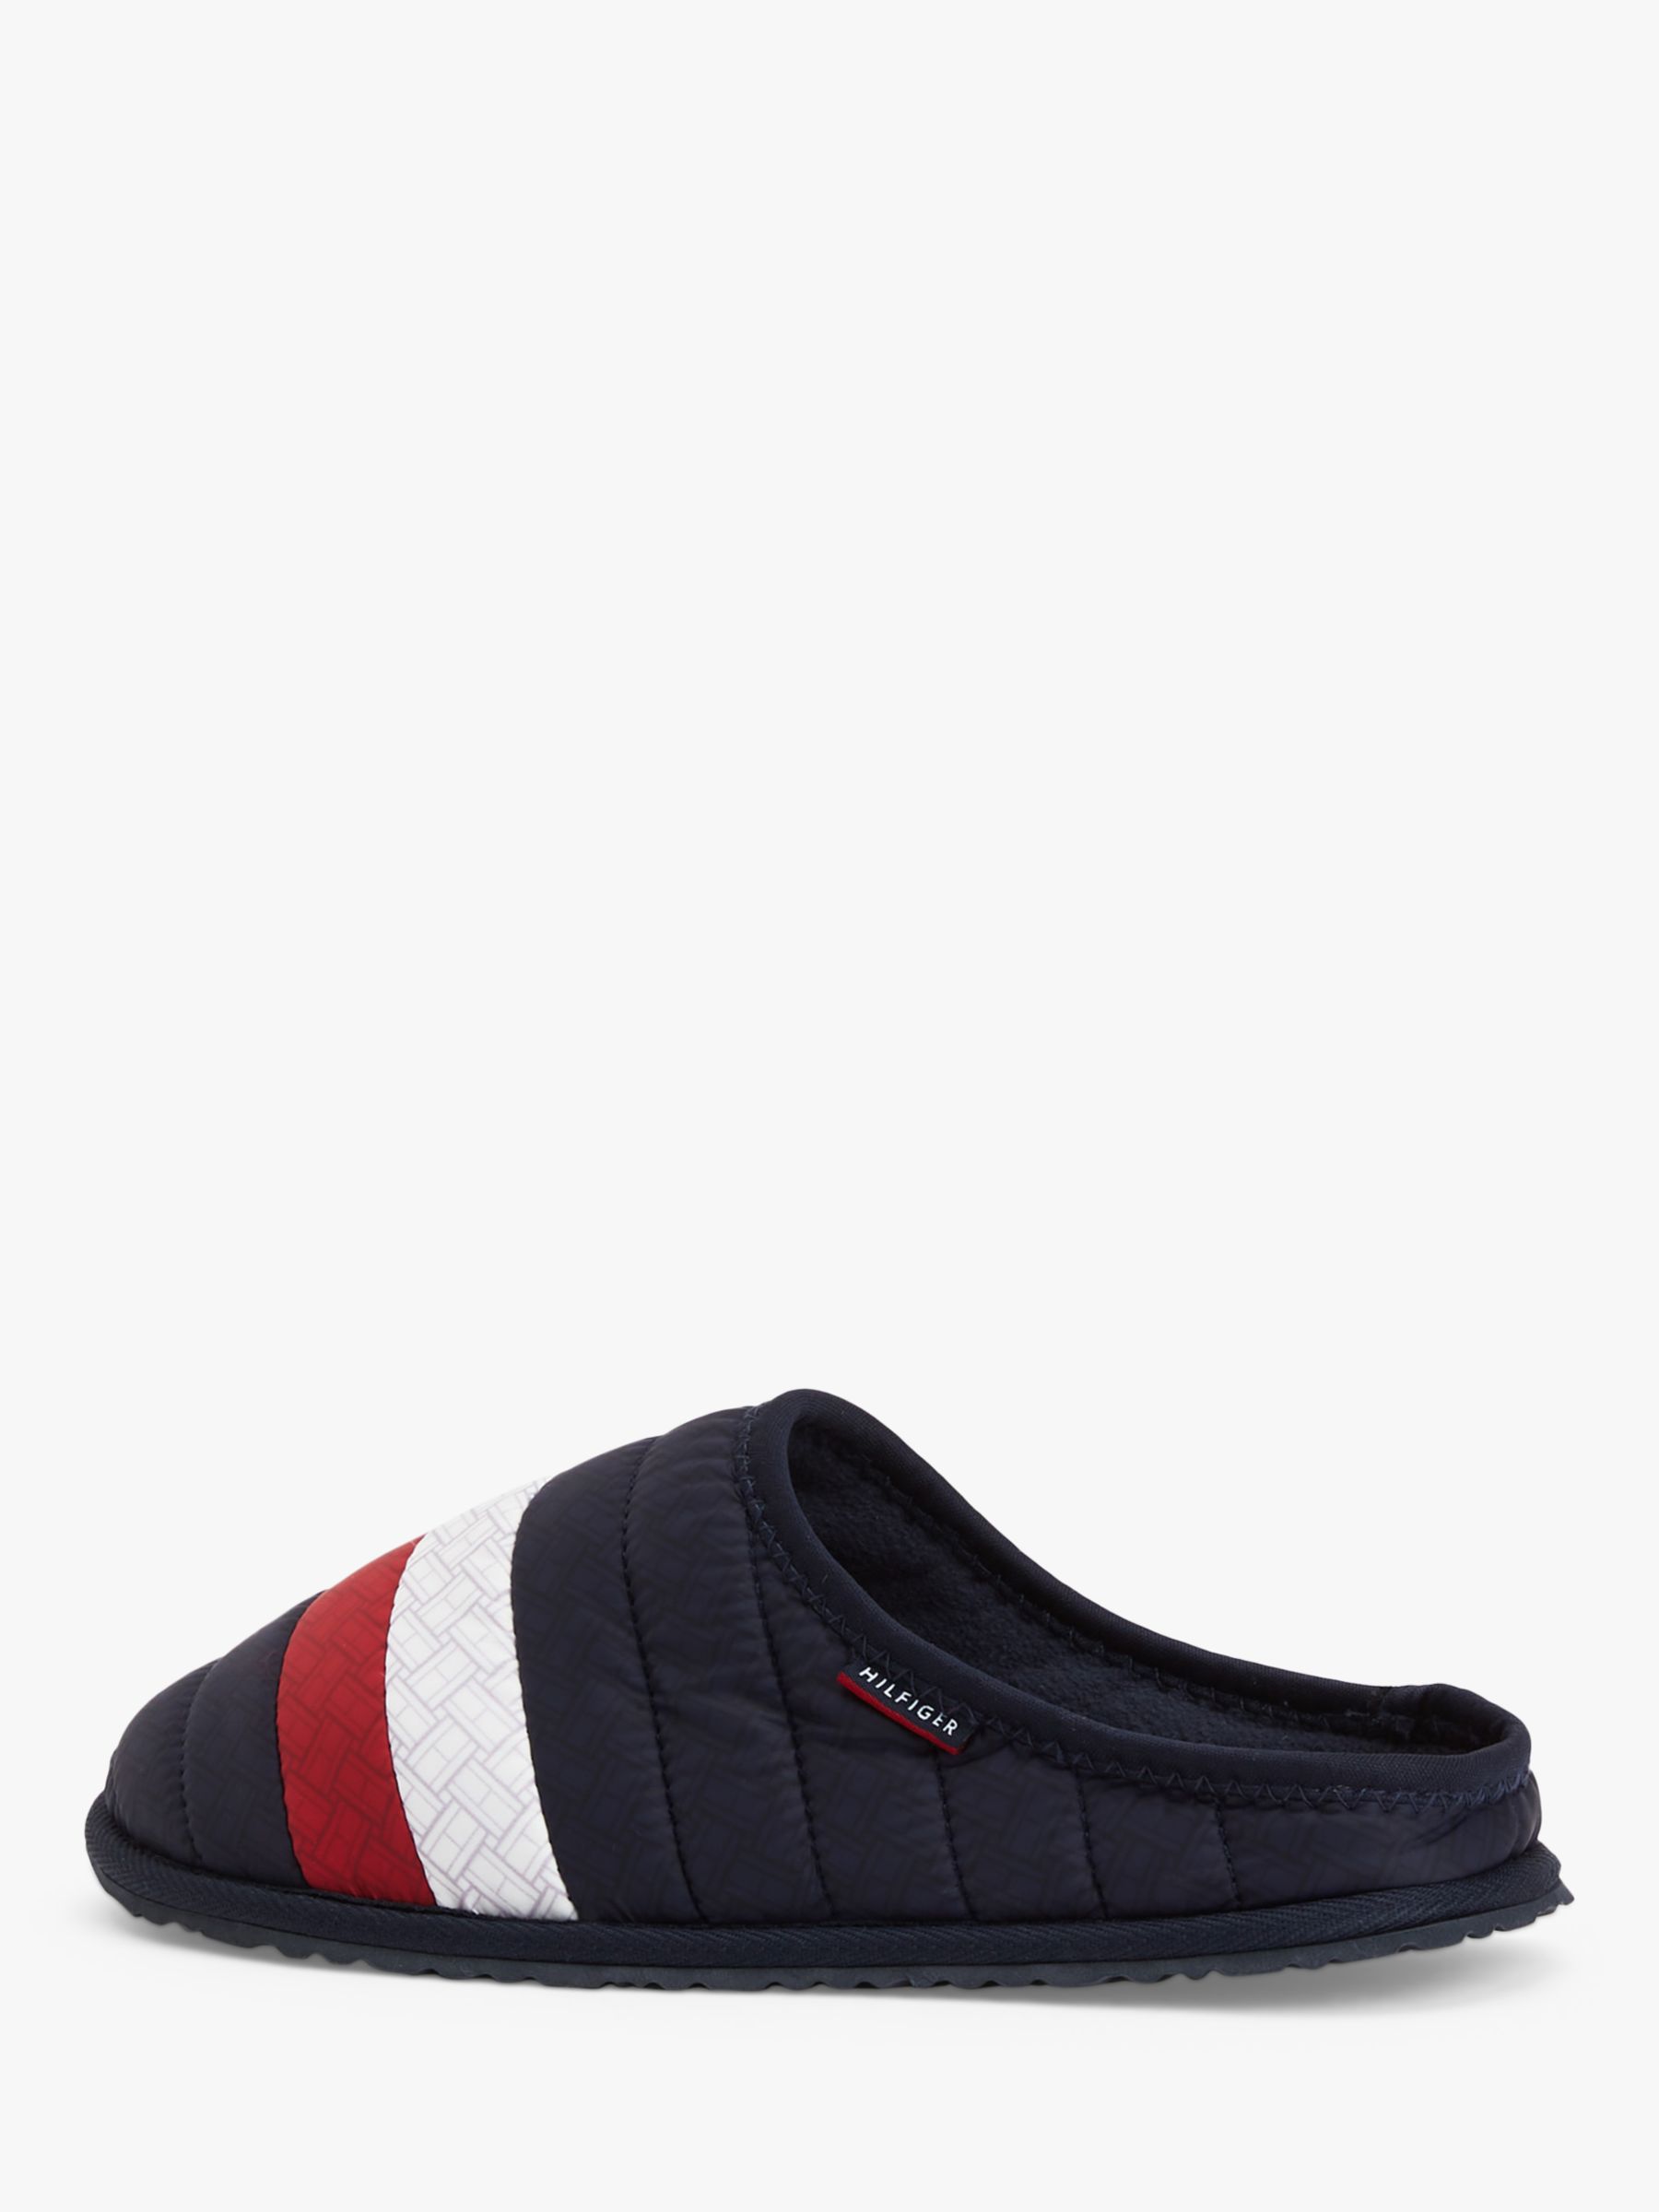 Tommy Hilfiger Padded Home Slippers, Red/White/Blue